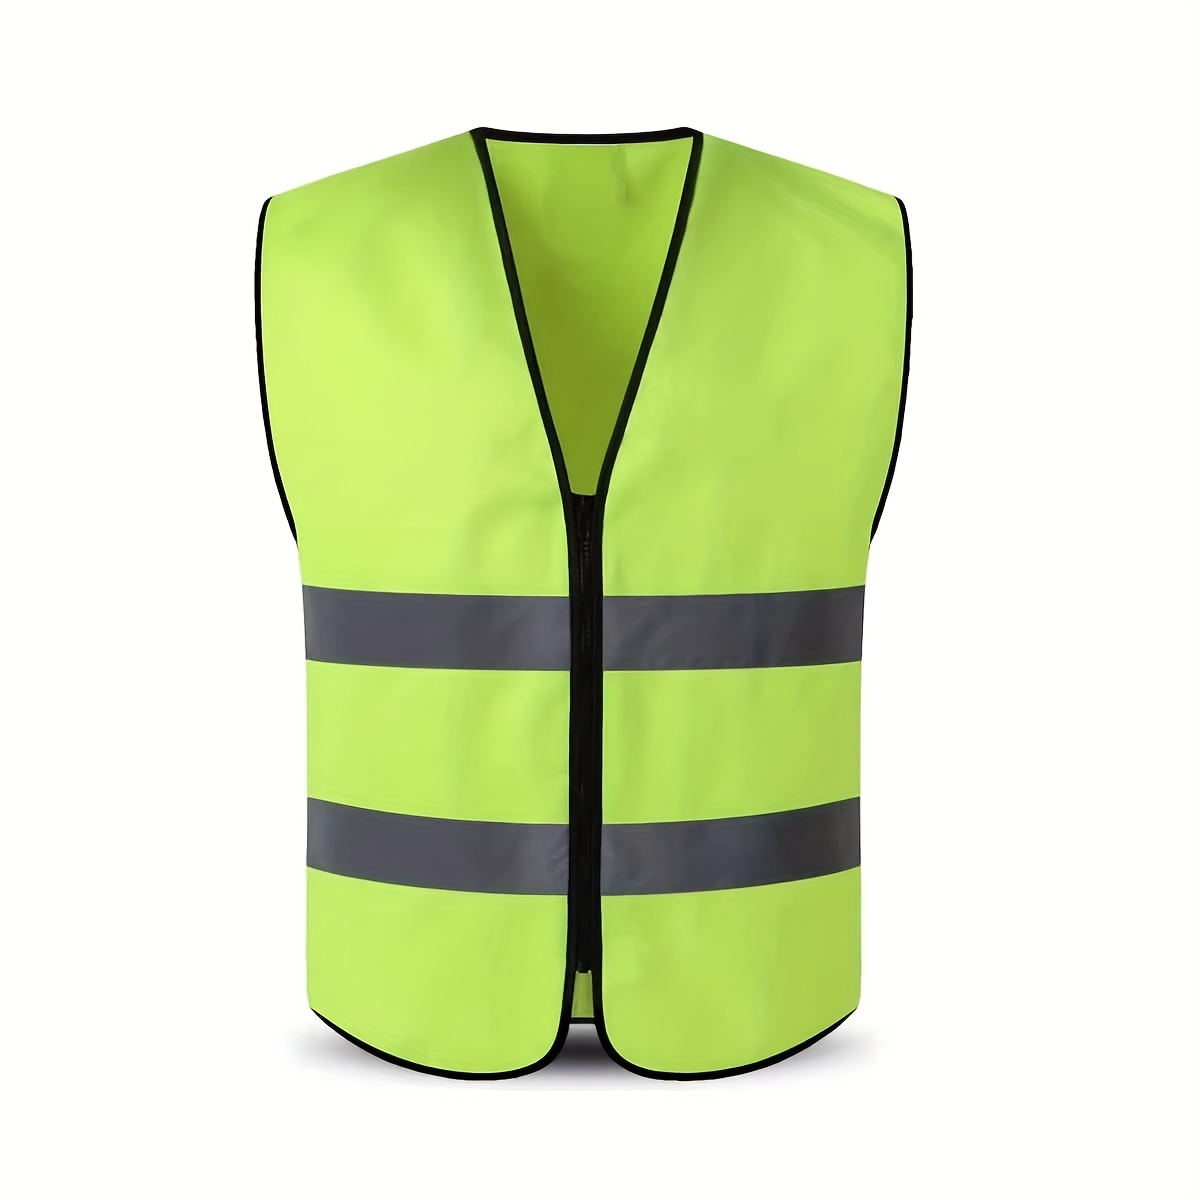 Reflective Vest For Running And Cycling, Reflective Clothing